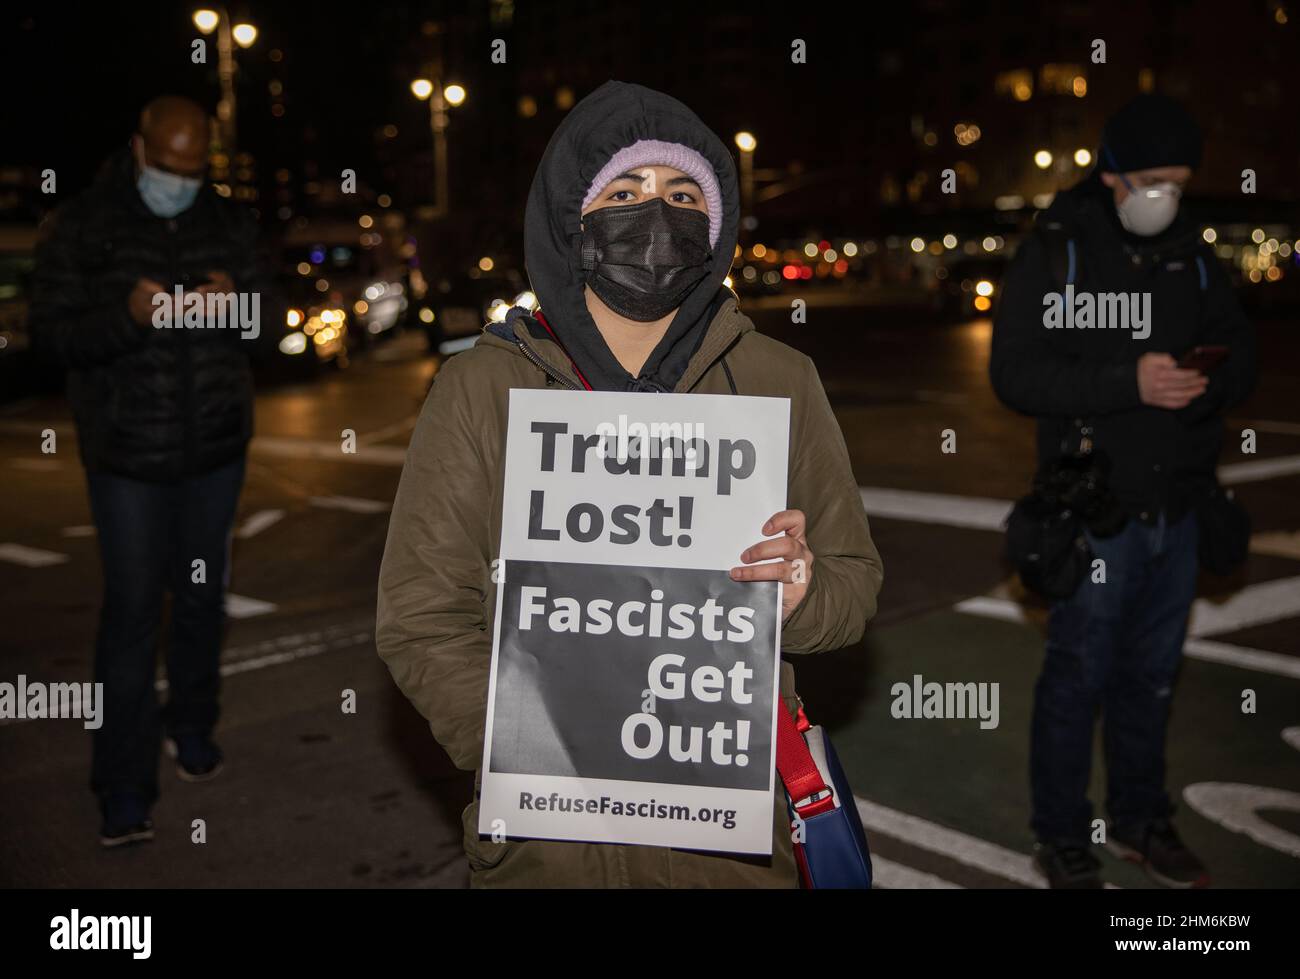 NEW YORK, N.Y. – January 6, 2021: An anti-Trump demonstrator is seen in Manhattan following riots at the U.S. Capitol in Washington, D.C. Stock Photo